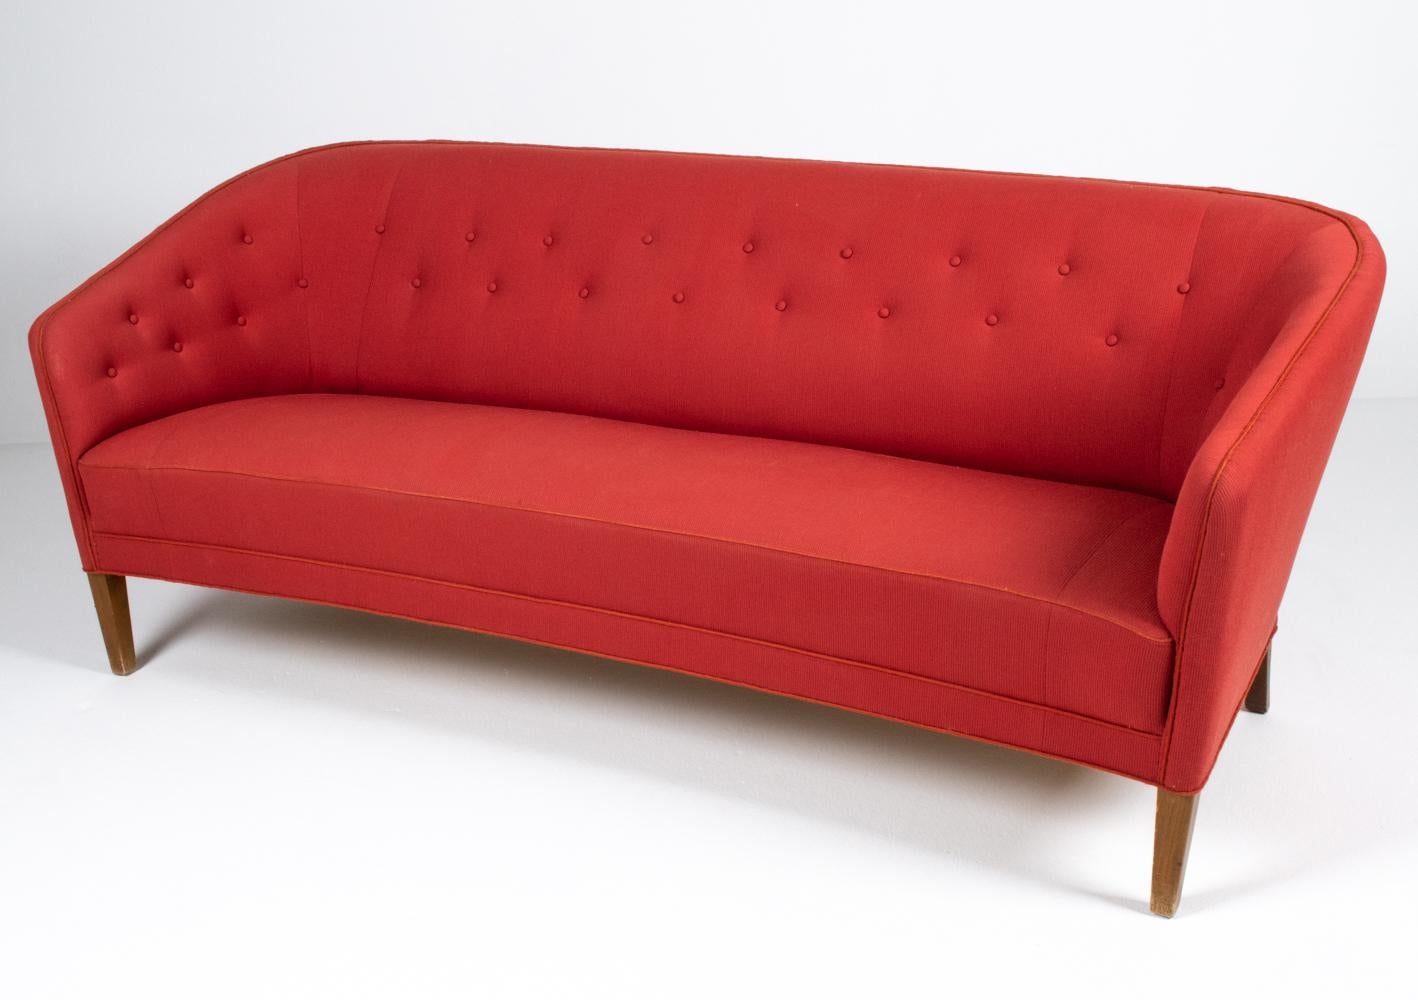 A rare and important three-seater sofa by Danish architect and furniture designer Ludvig Pontoppidan (1883-1962). One of the early figures in Scandinavian modern design, Pontoppidan's trendsetting designs took hold in the 1940's, ahead of the